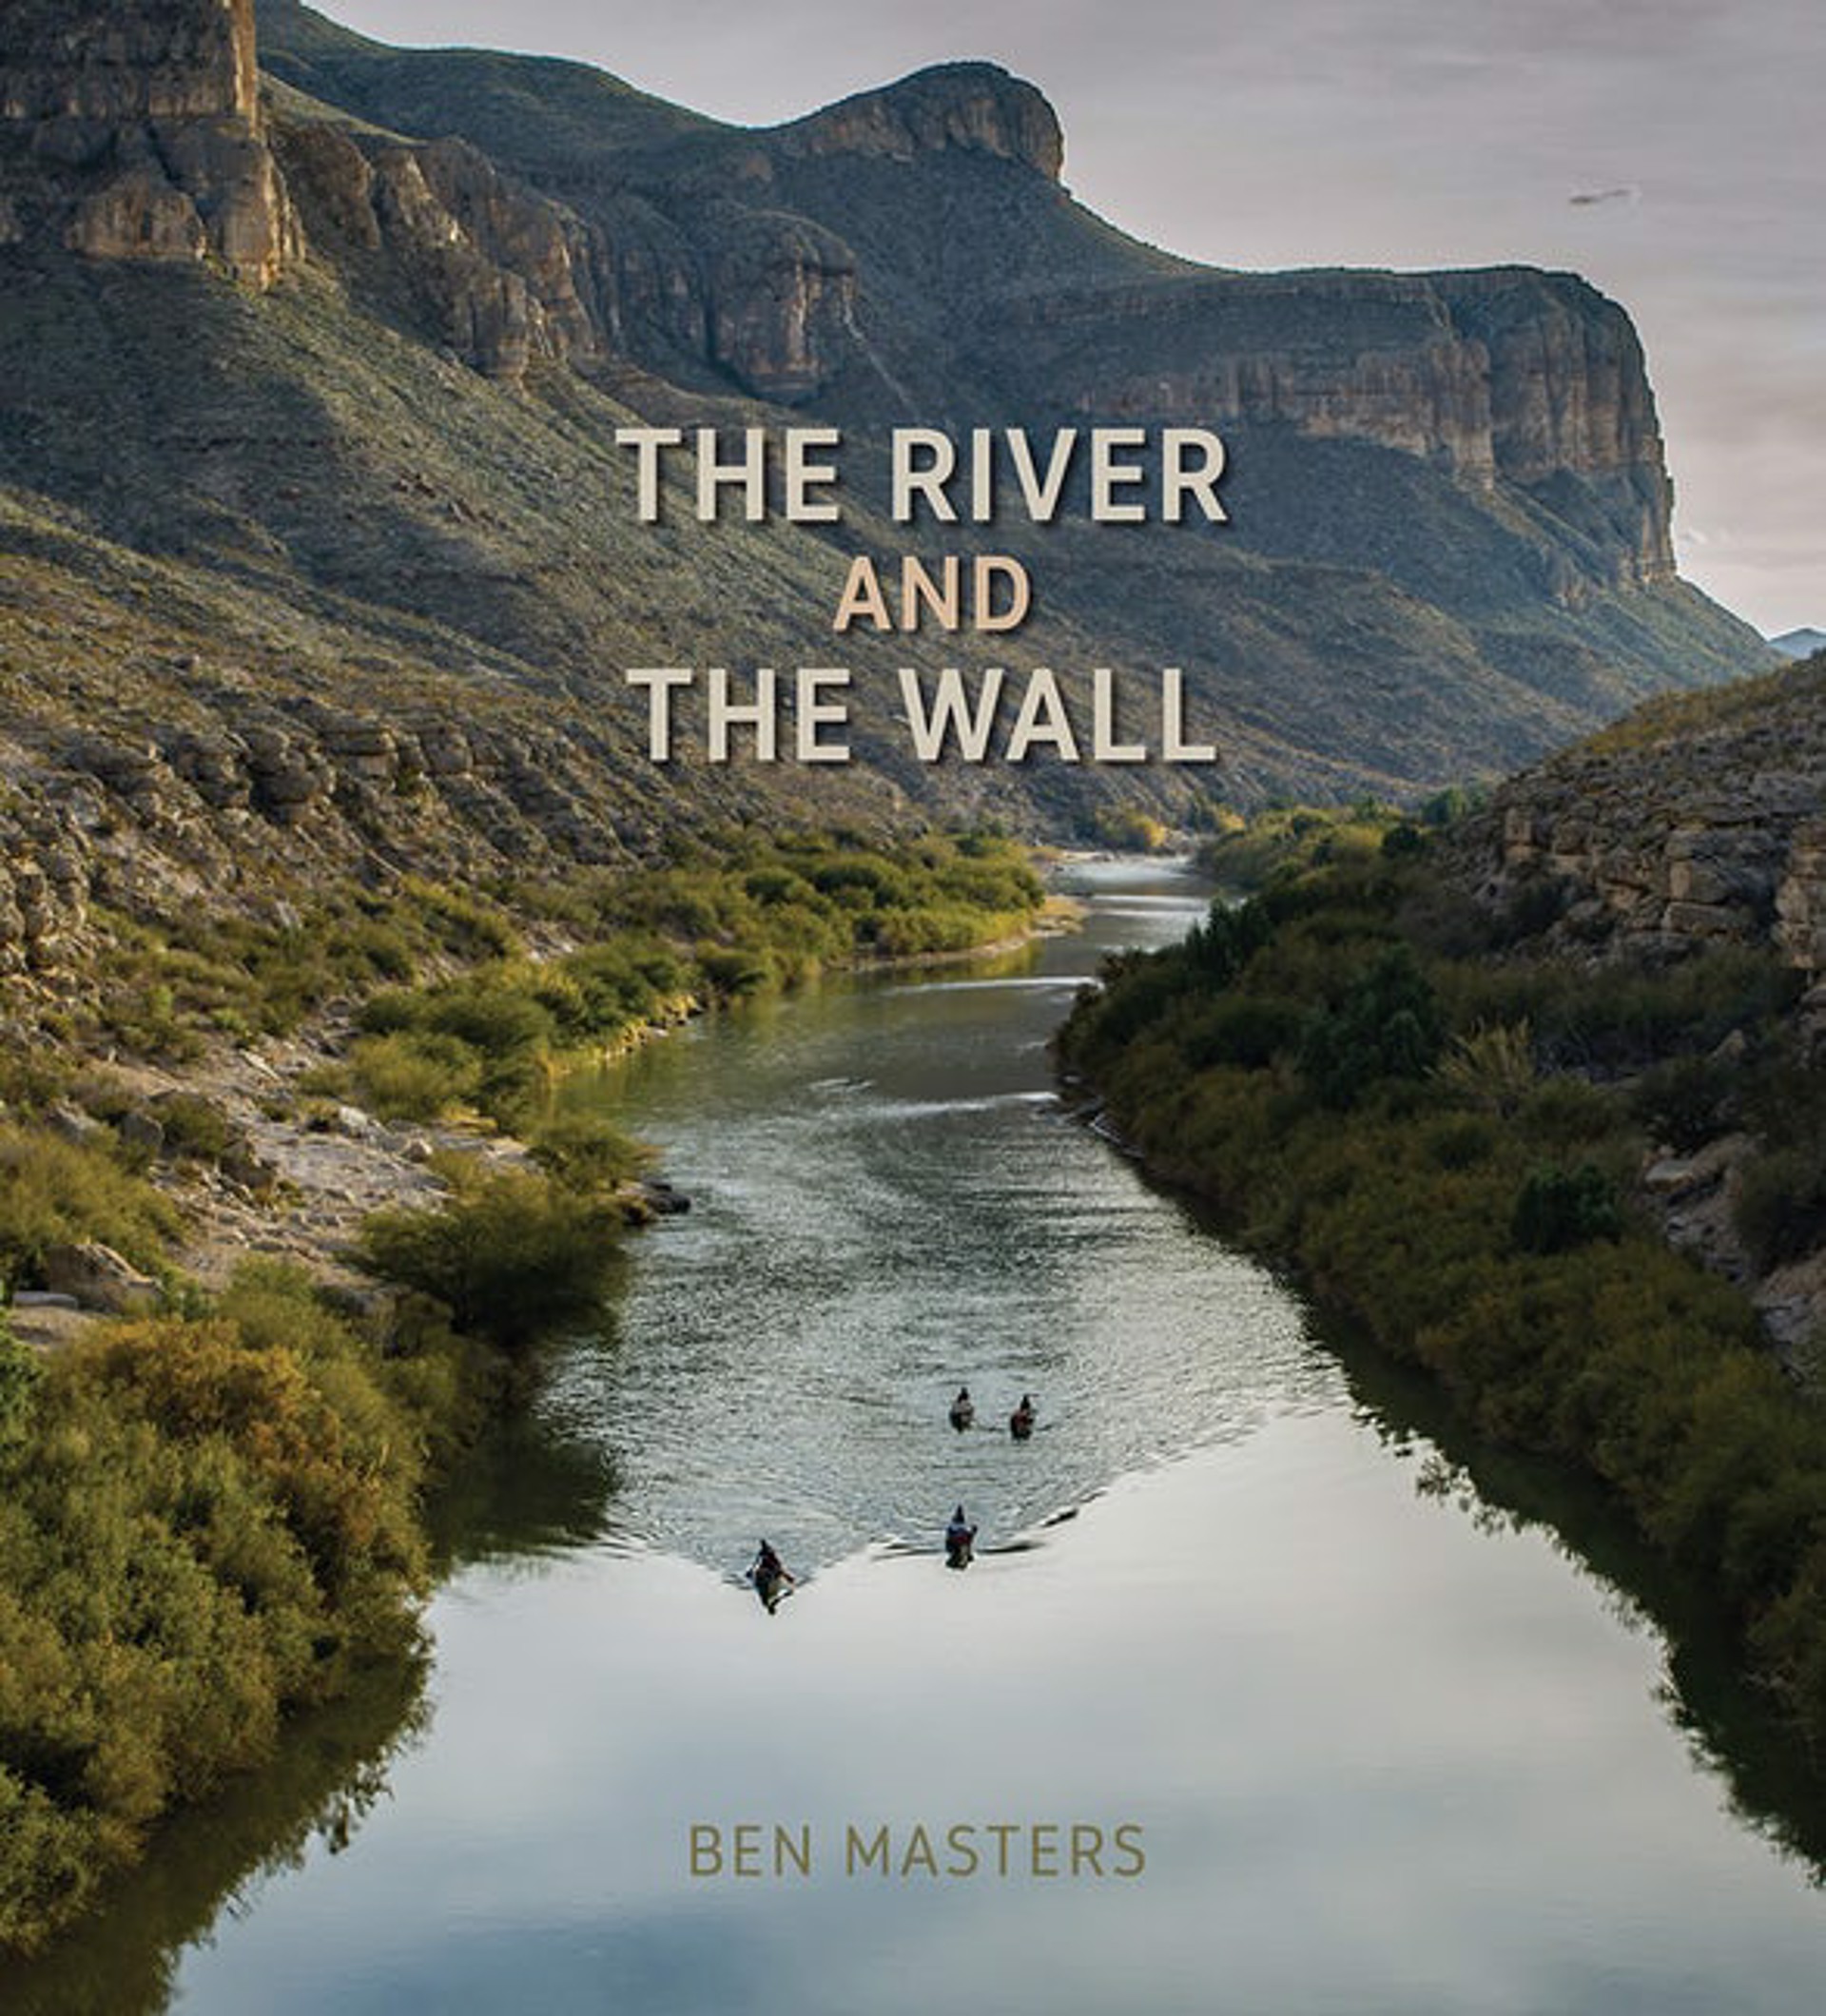 The River and the Wall by Ben Masters by Publications